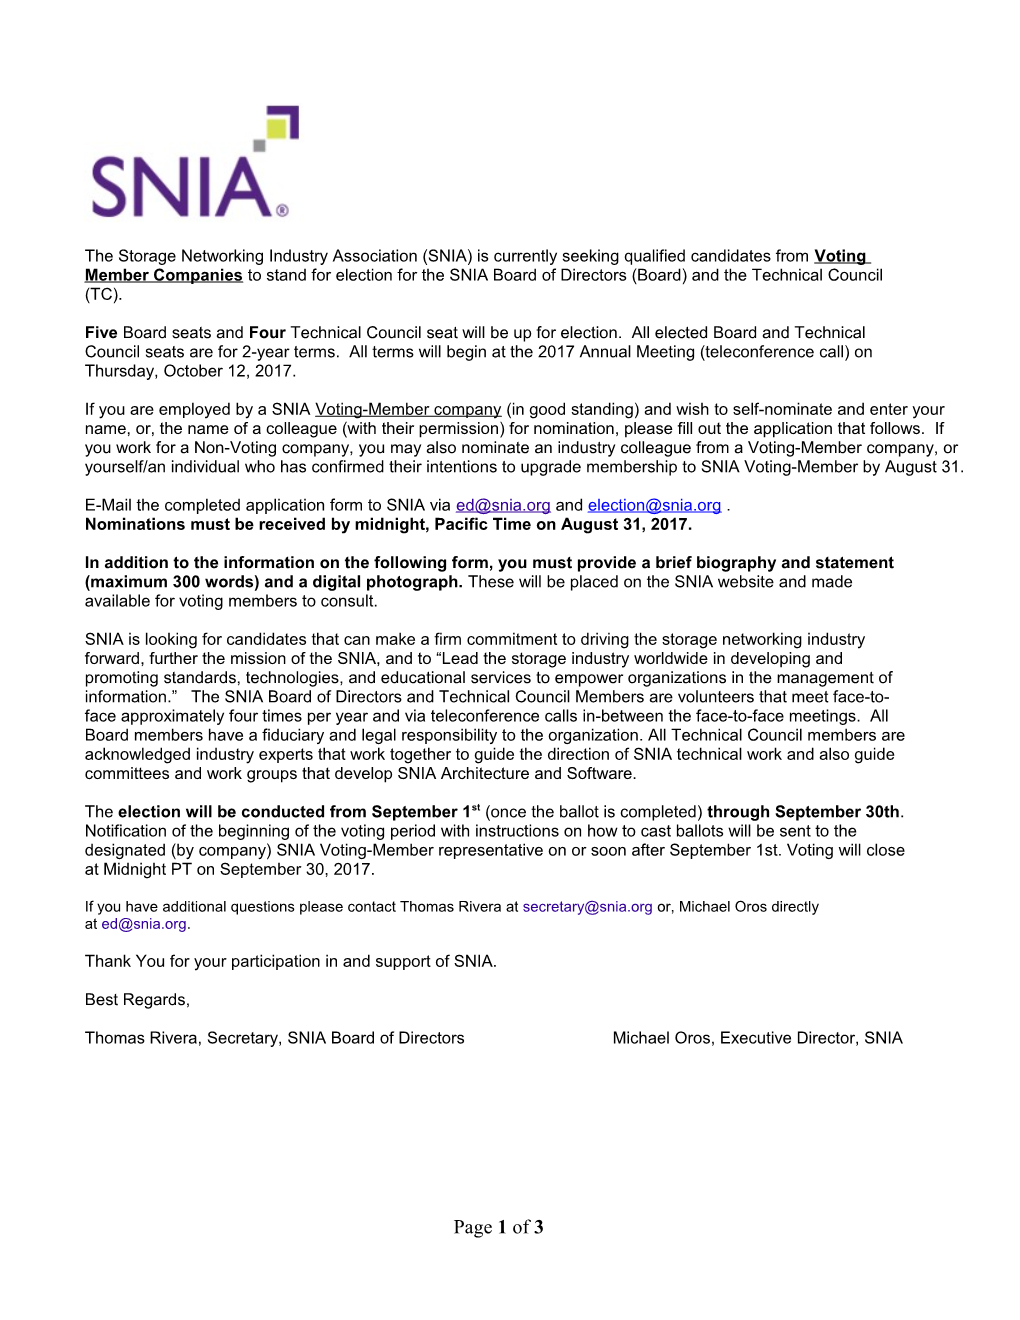 The Storage Networking Industry Association Is Currently Seeking Qualified Candidates From